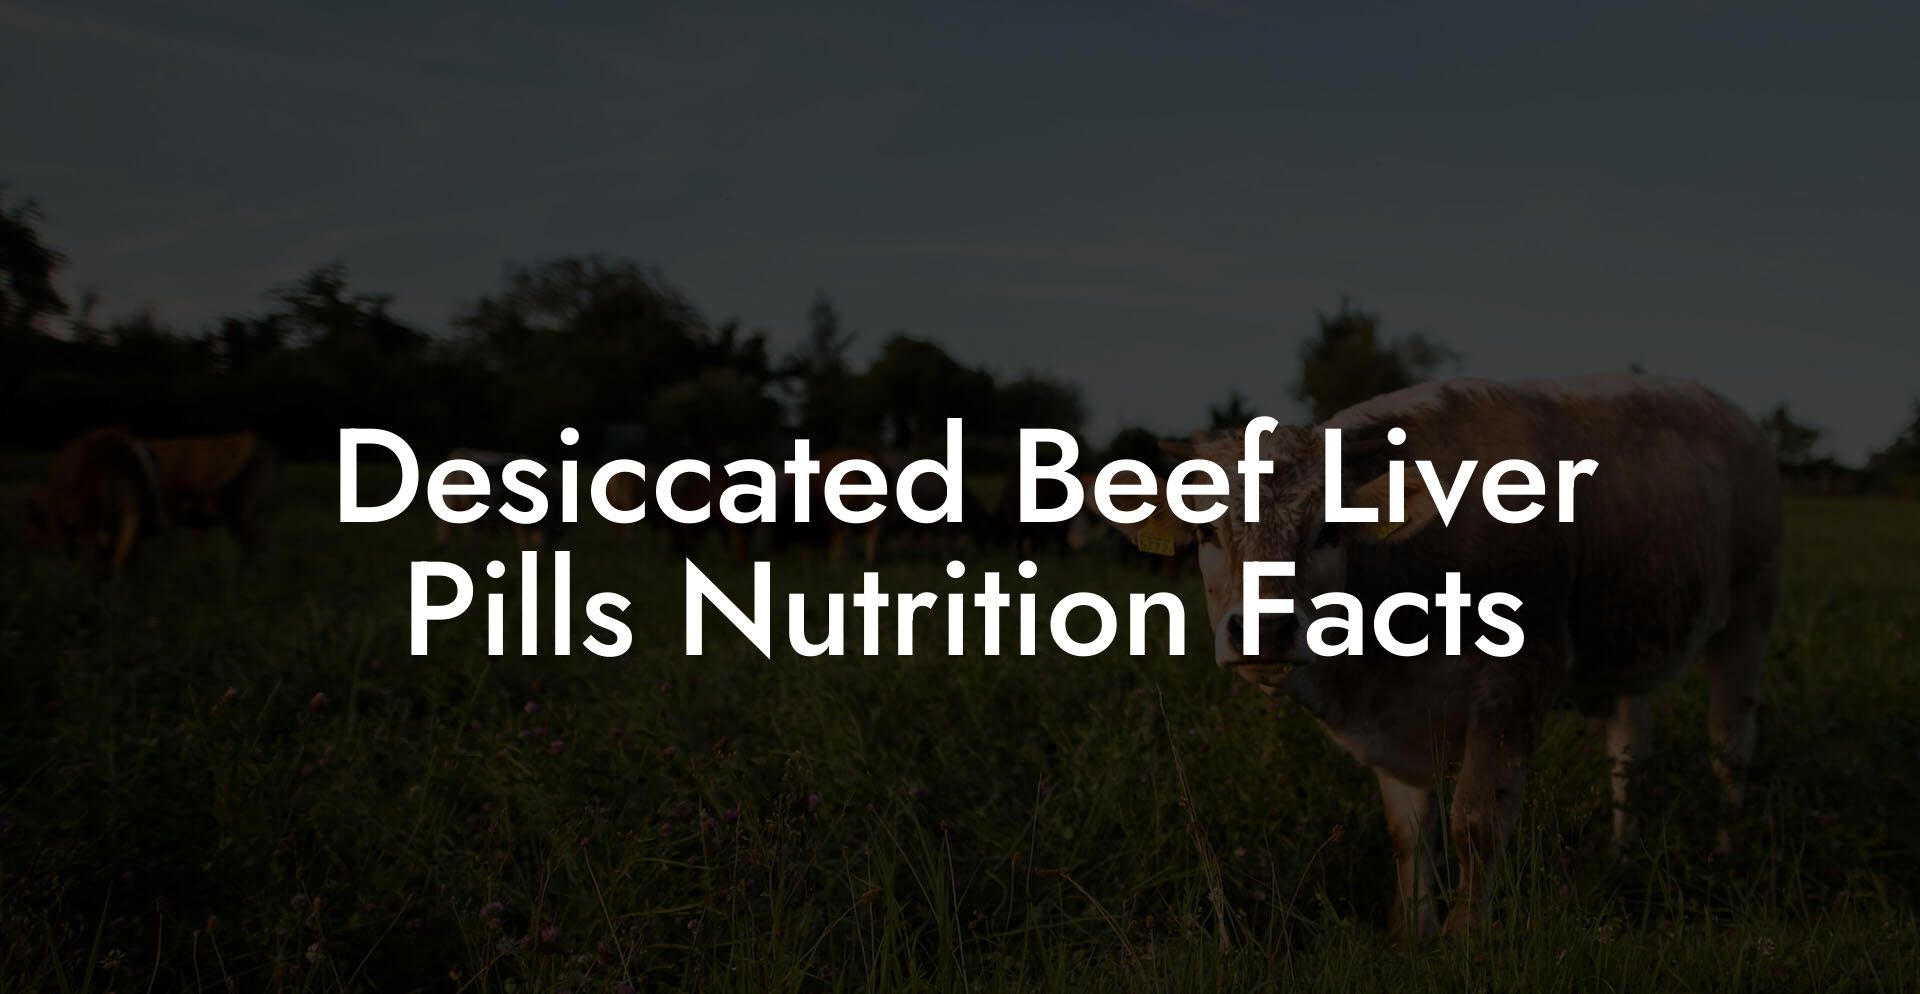 Desiccated Beef Liver Pills Nutrition Facts